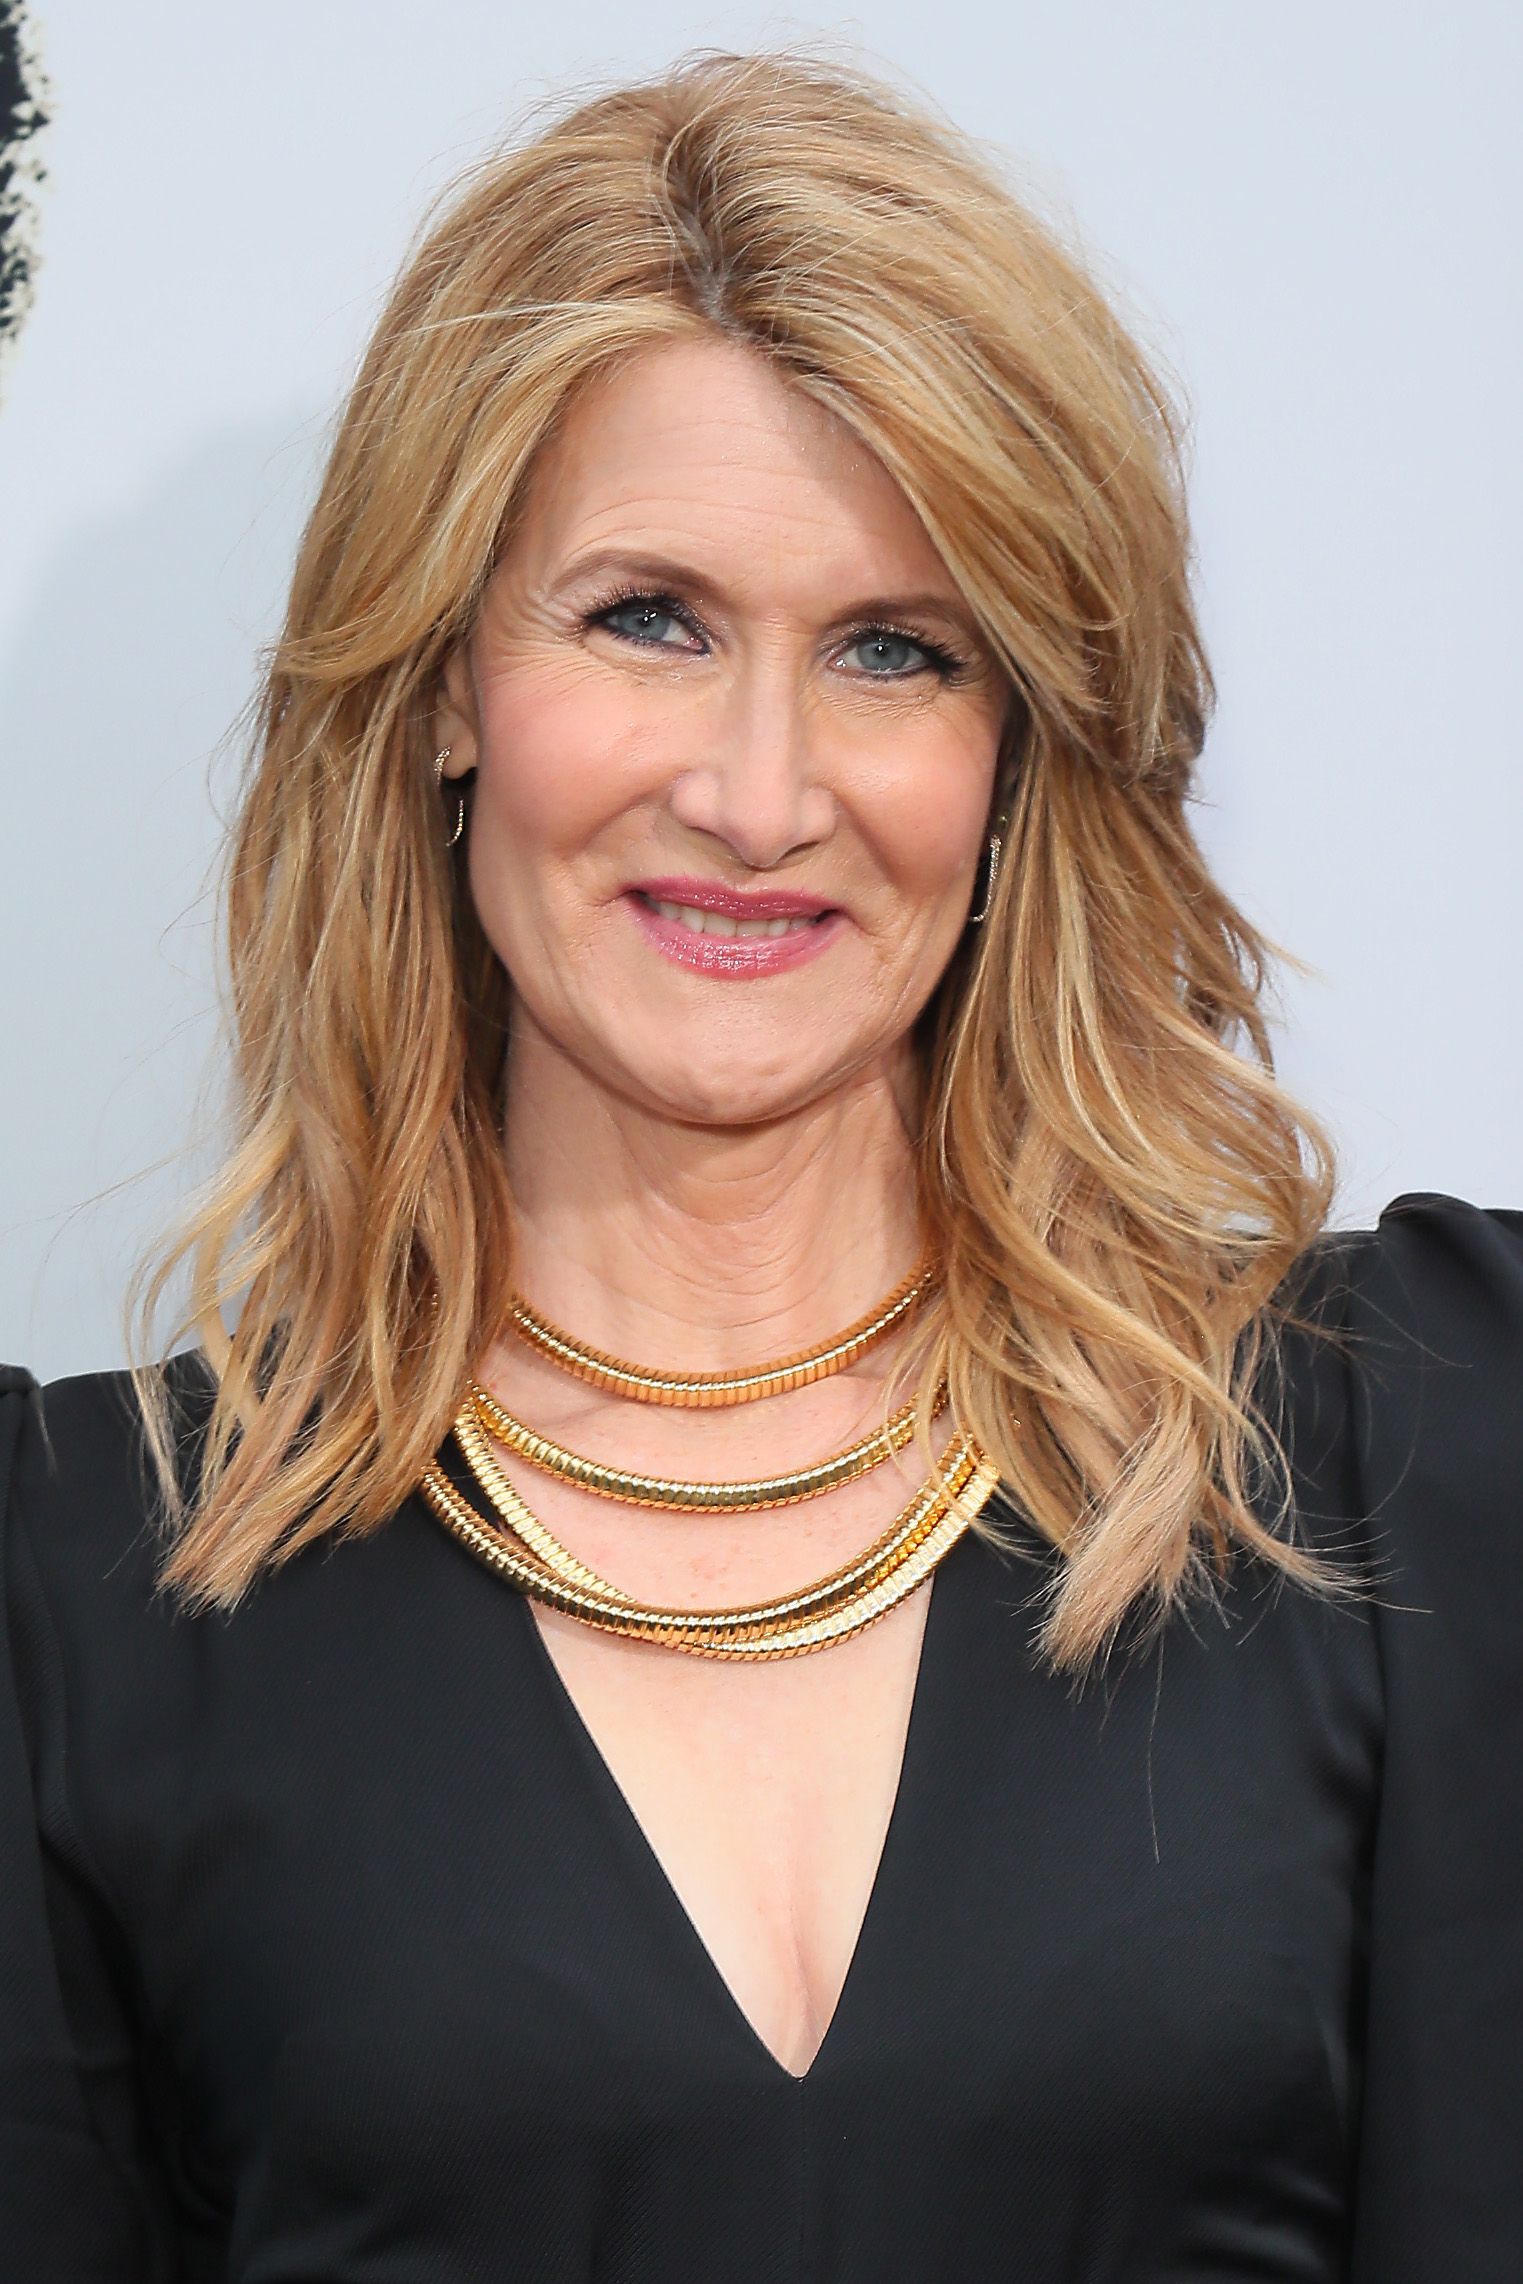 Laura Dern during the premiere of Netflix's "The Black Godfather" at Paramount Theater on the Paramount Studios on June 03, 2019 in Hollywood, California | Source: Getty Images